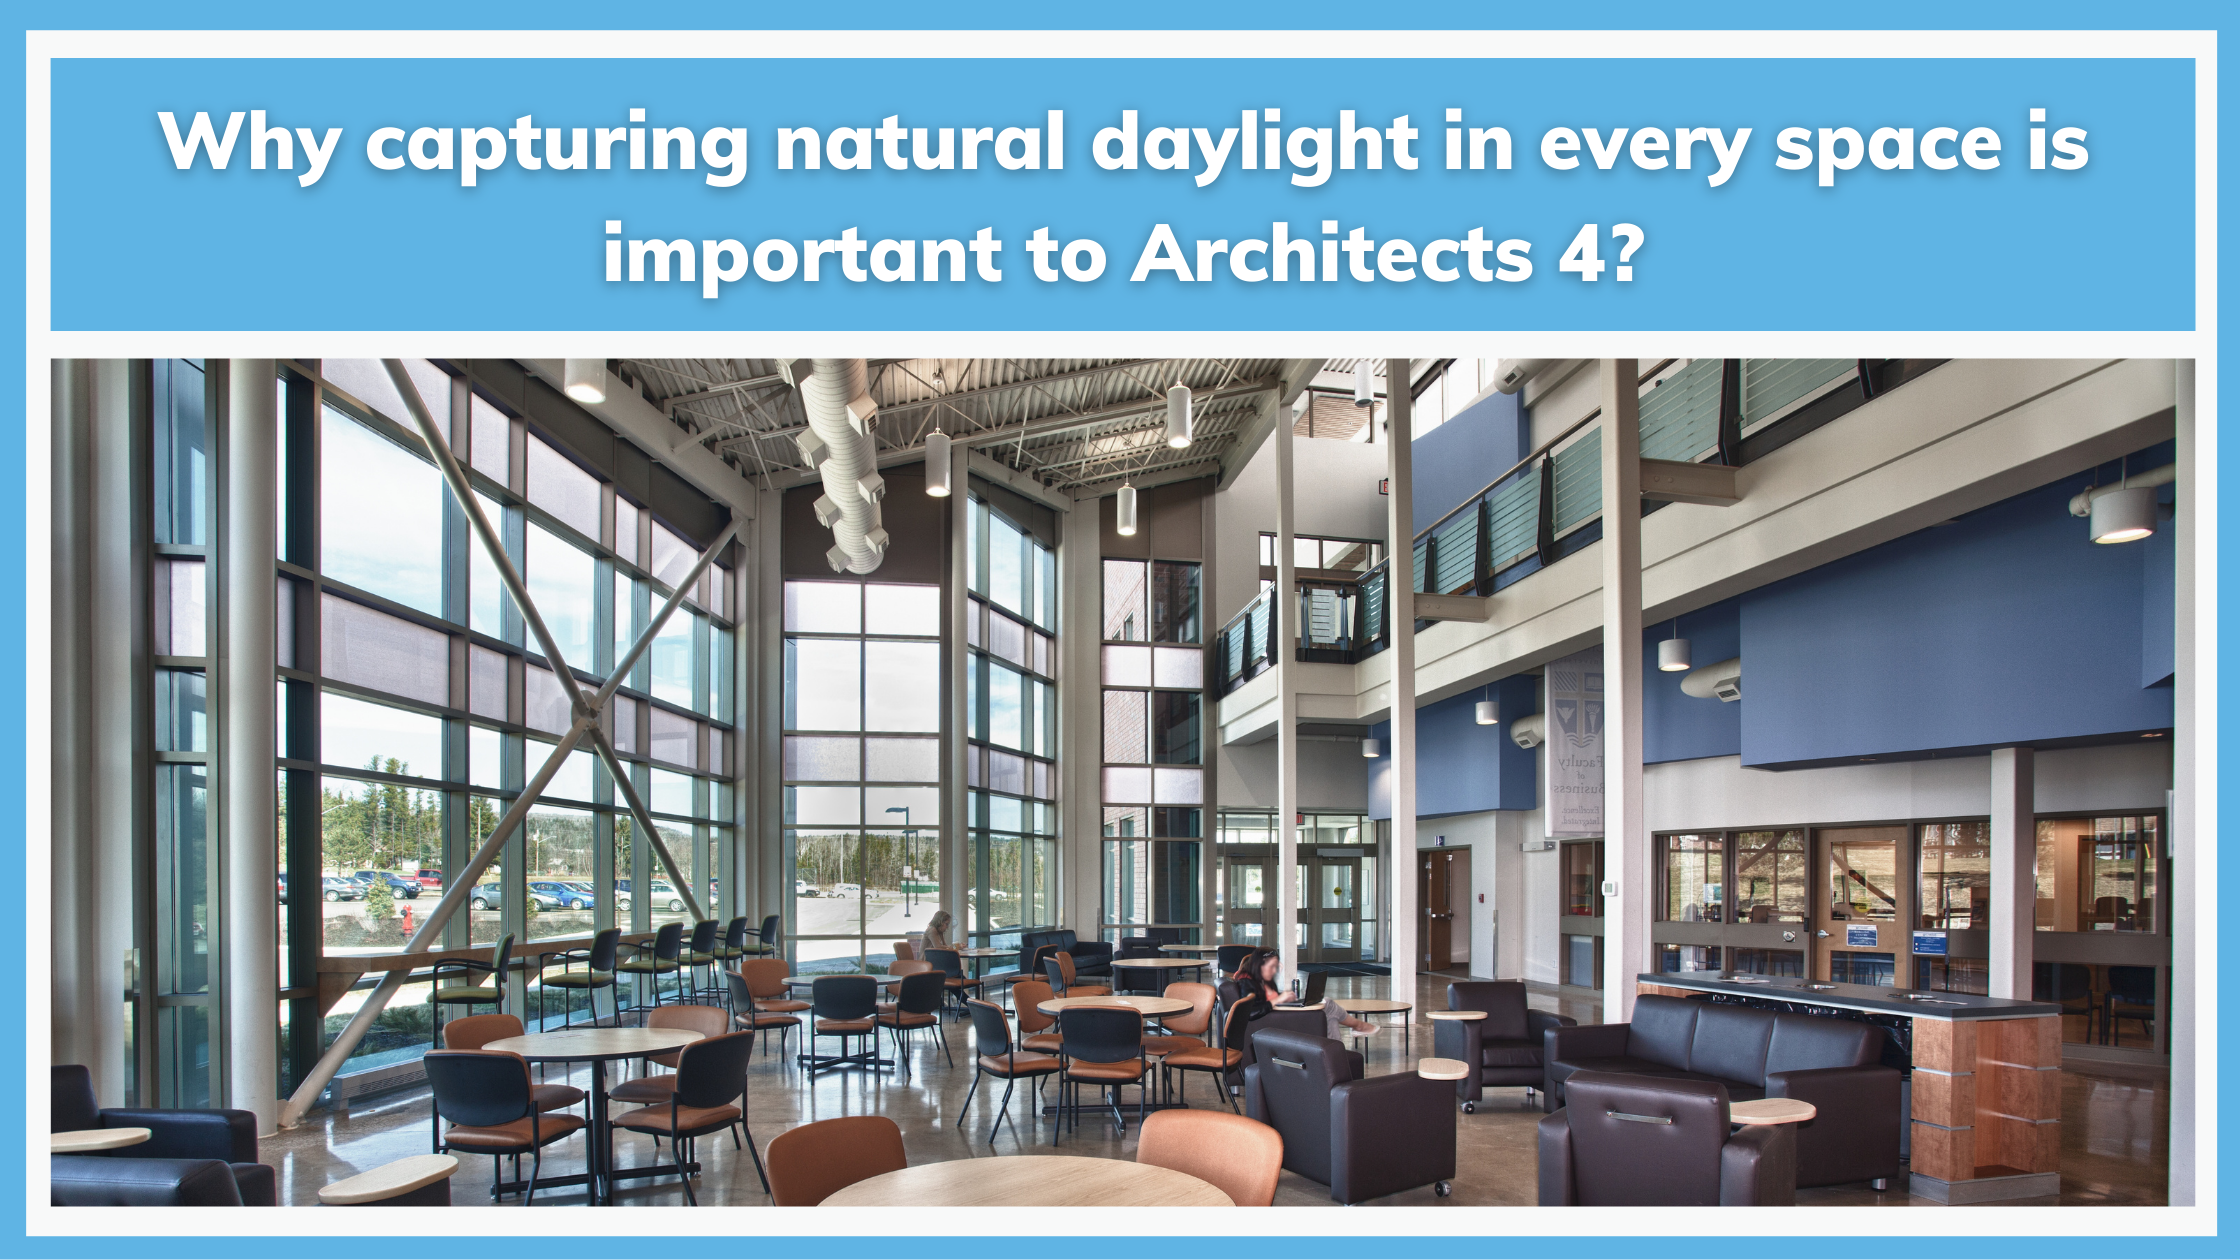 Why is it important to Architects 4 to capture daylight in every space?